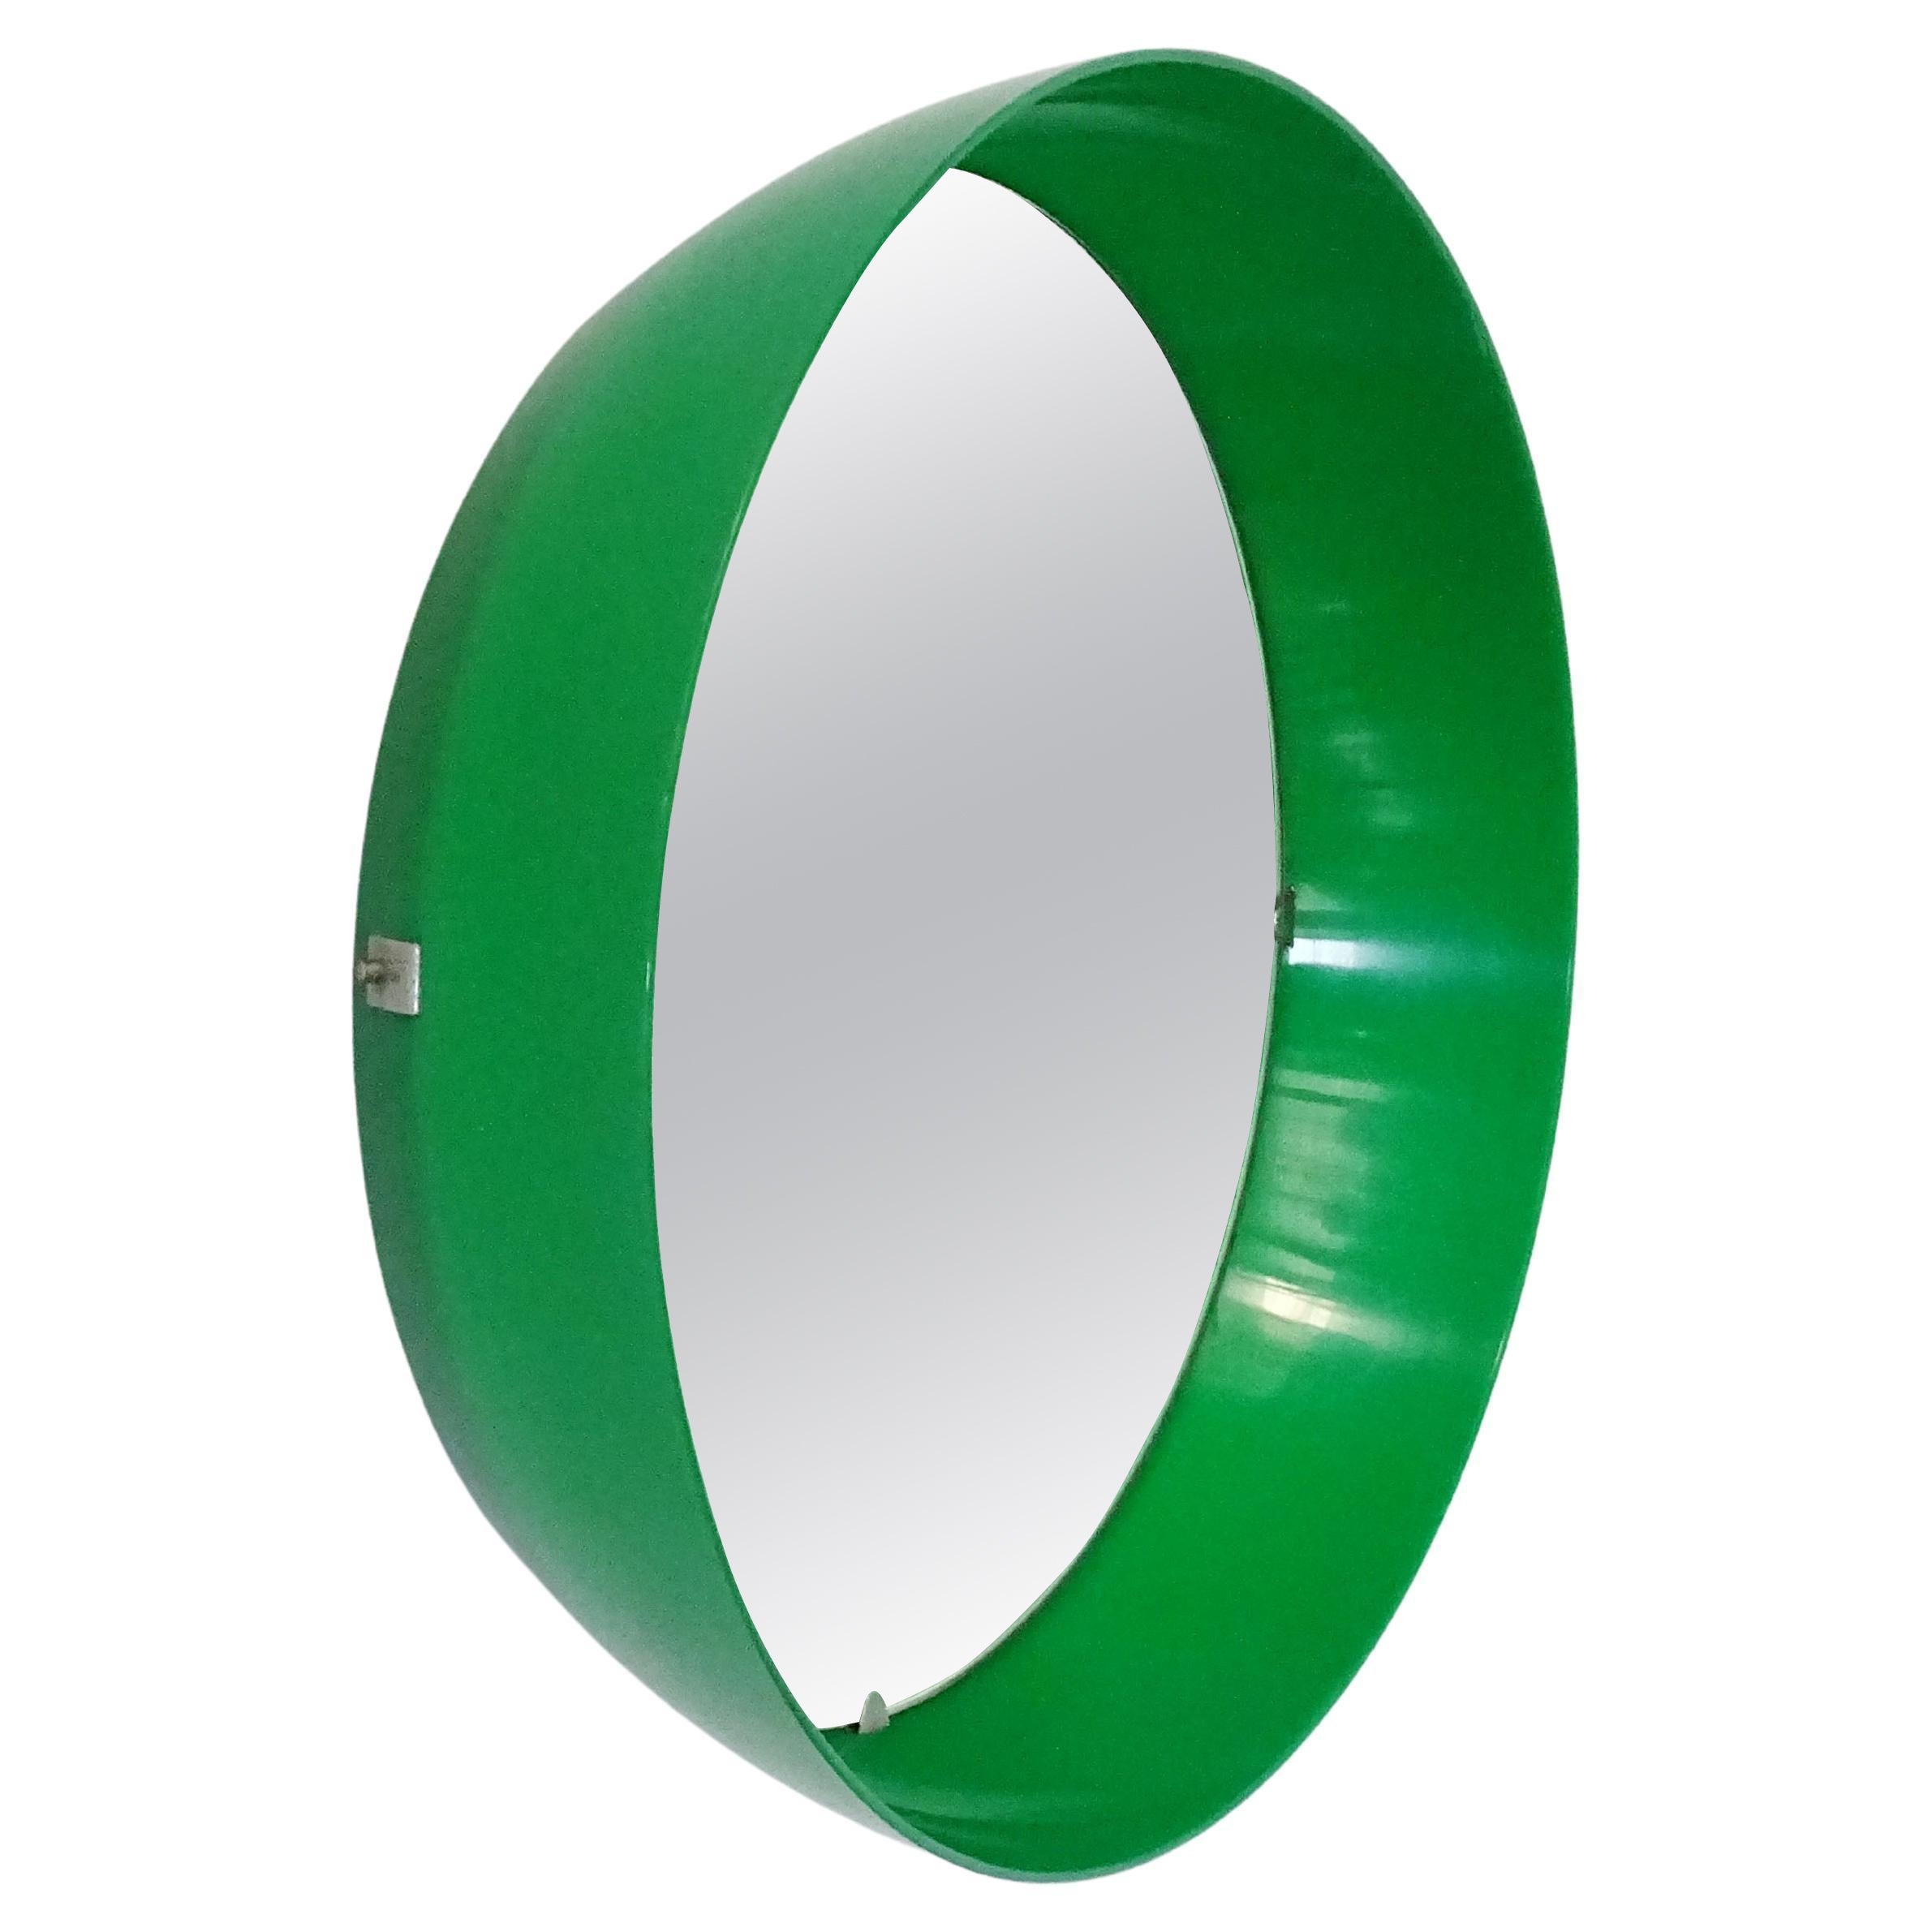 Early Kartell Green Plastic Pop Art Mirror, Italy, 1960s For Sale